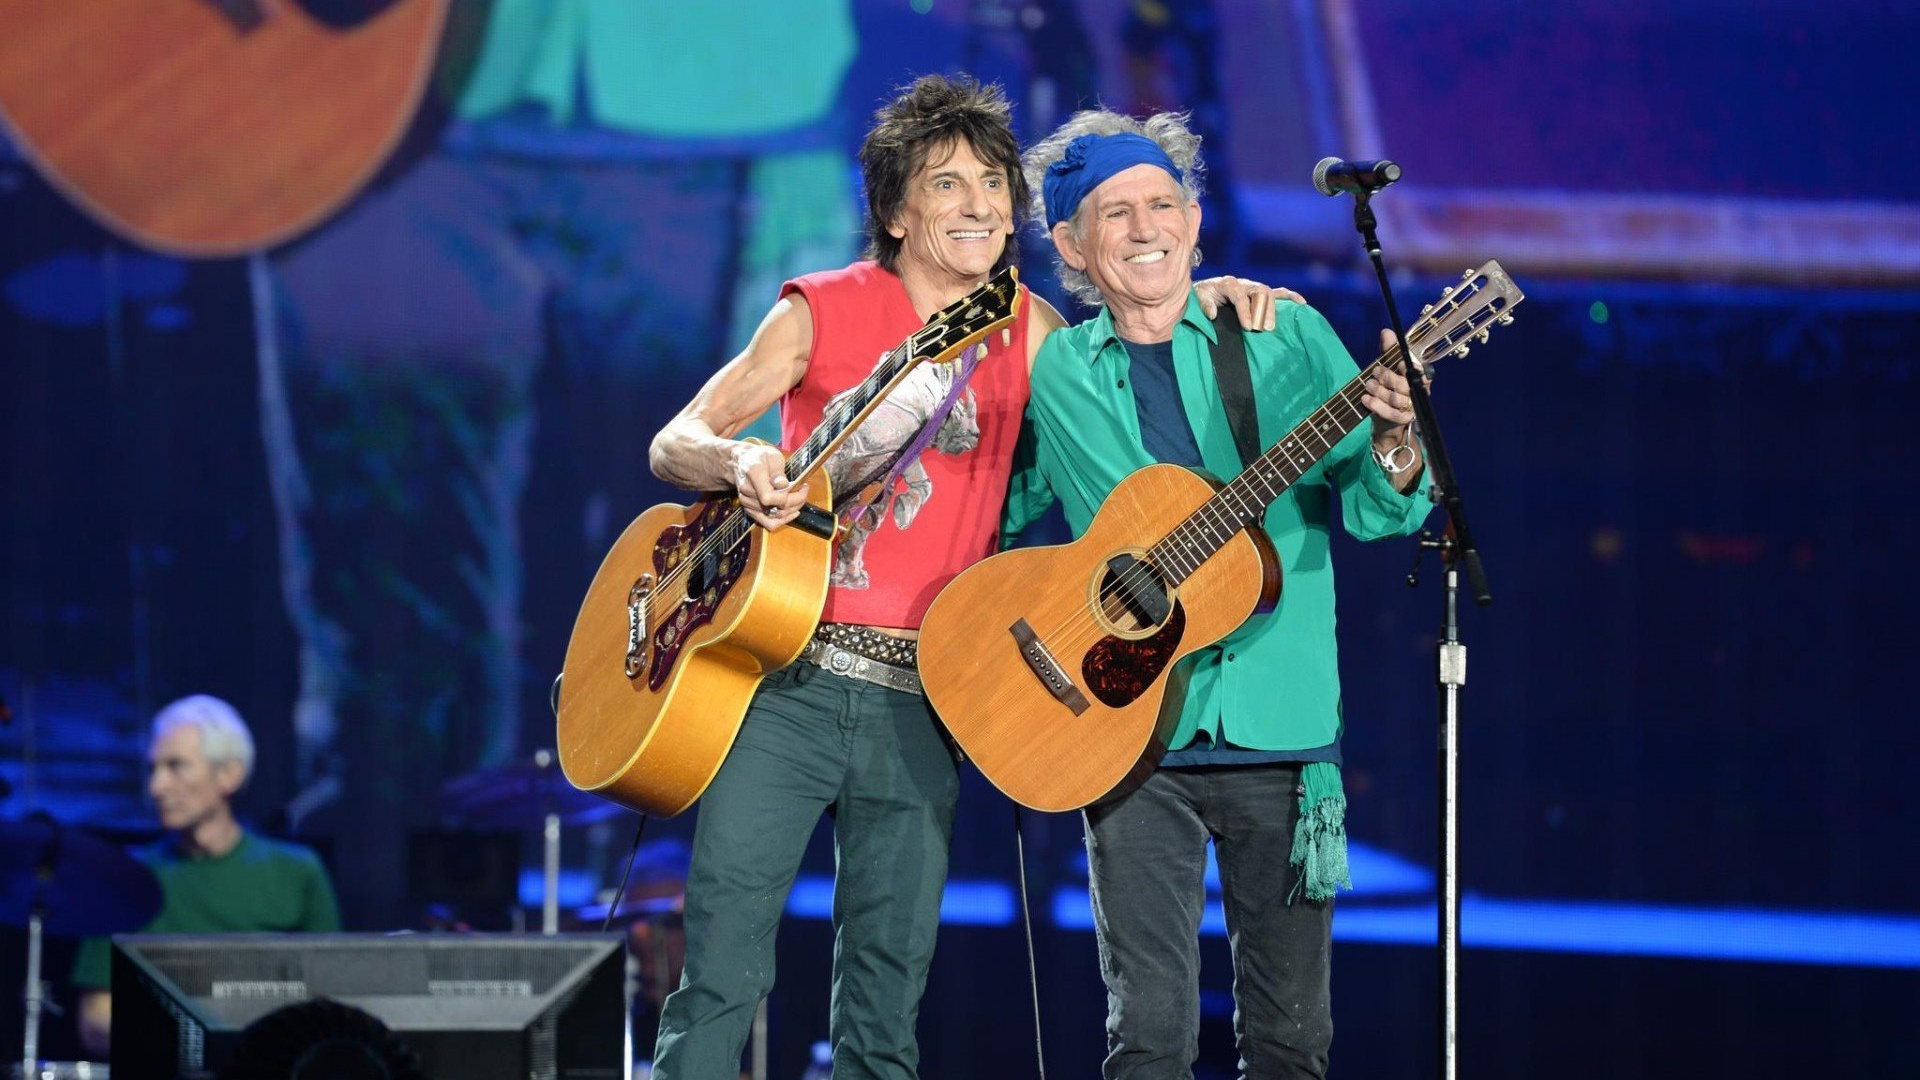 The Rolling Stones wallpapers, Ronnie Wood and Keith Richards, High-quality wallpapers, 1920x1080 Full HD Desktop